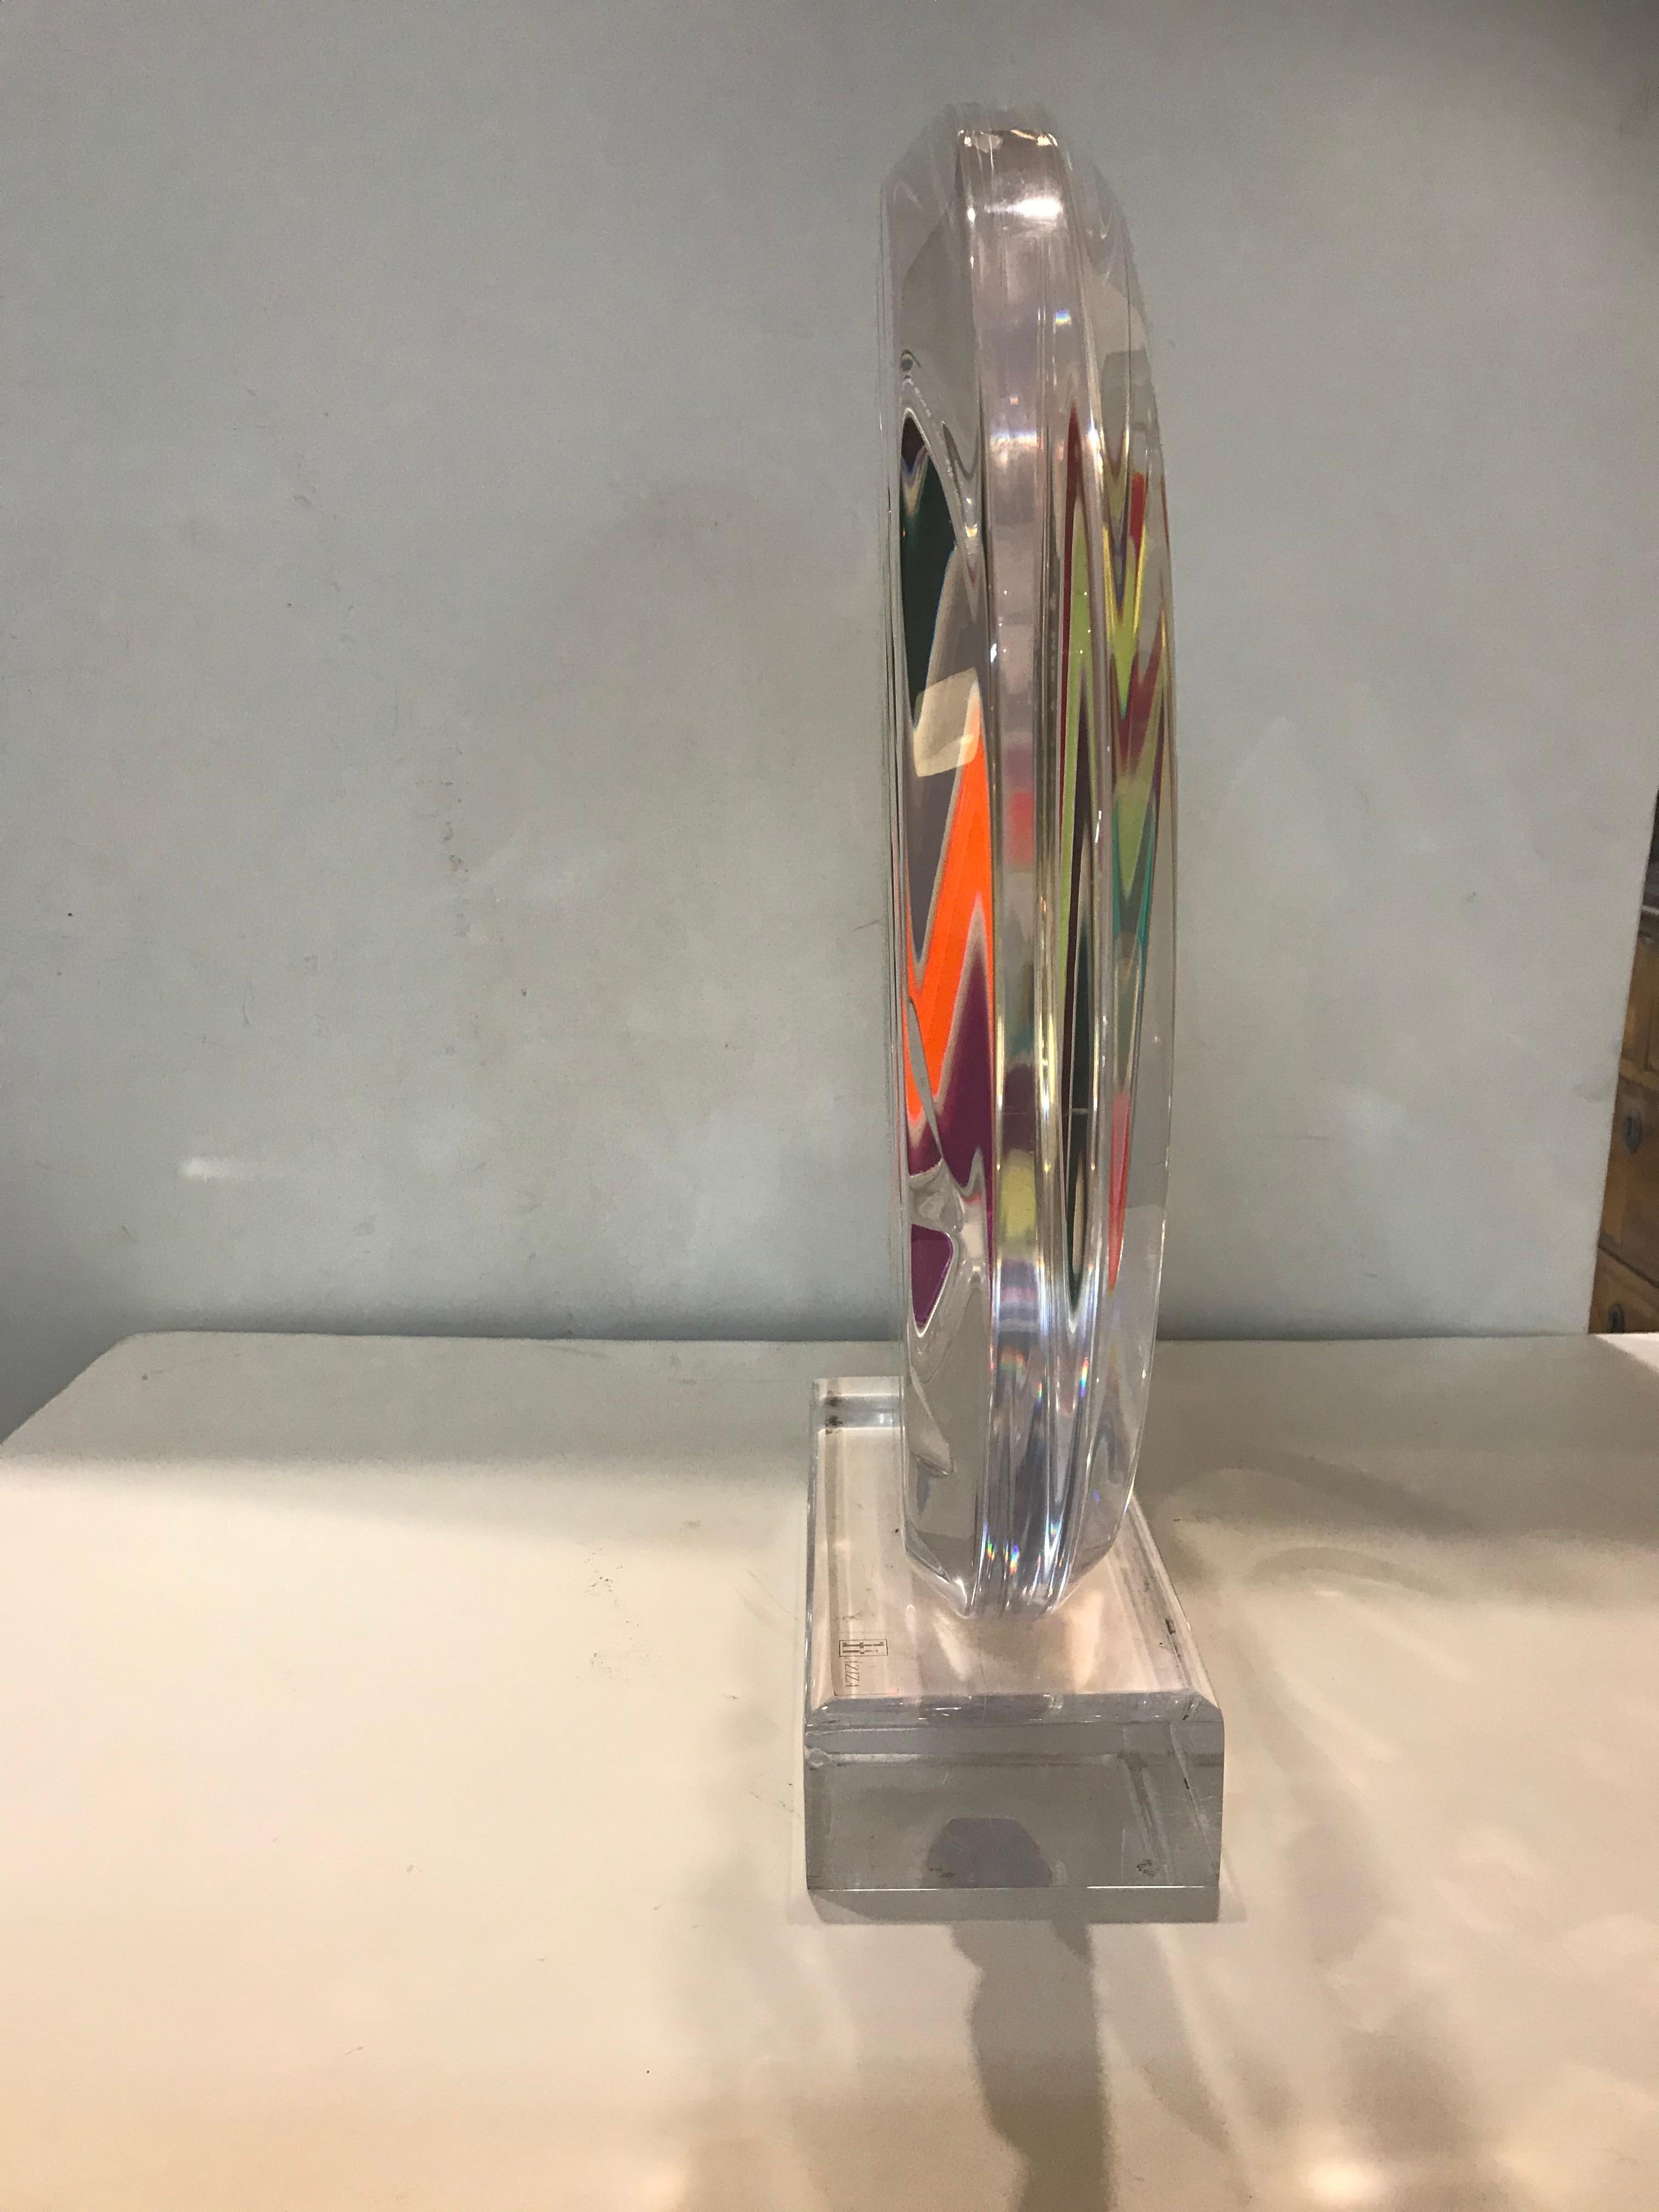 Modern Colorful Tick Circle Lucite Center Table Sculpture signed by Shalomi Haziza

One of  Colorful Masterpiece of lucite Art work by Shalomi Haziza .Acrylic is the most sophisticated material Haziza has mastered to date. It is an unforgiving, but